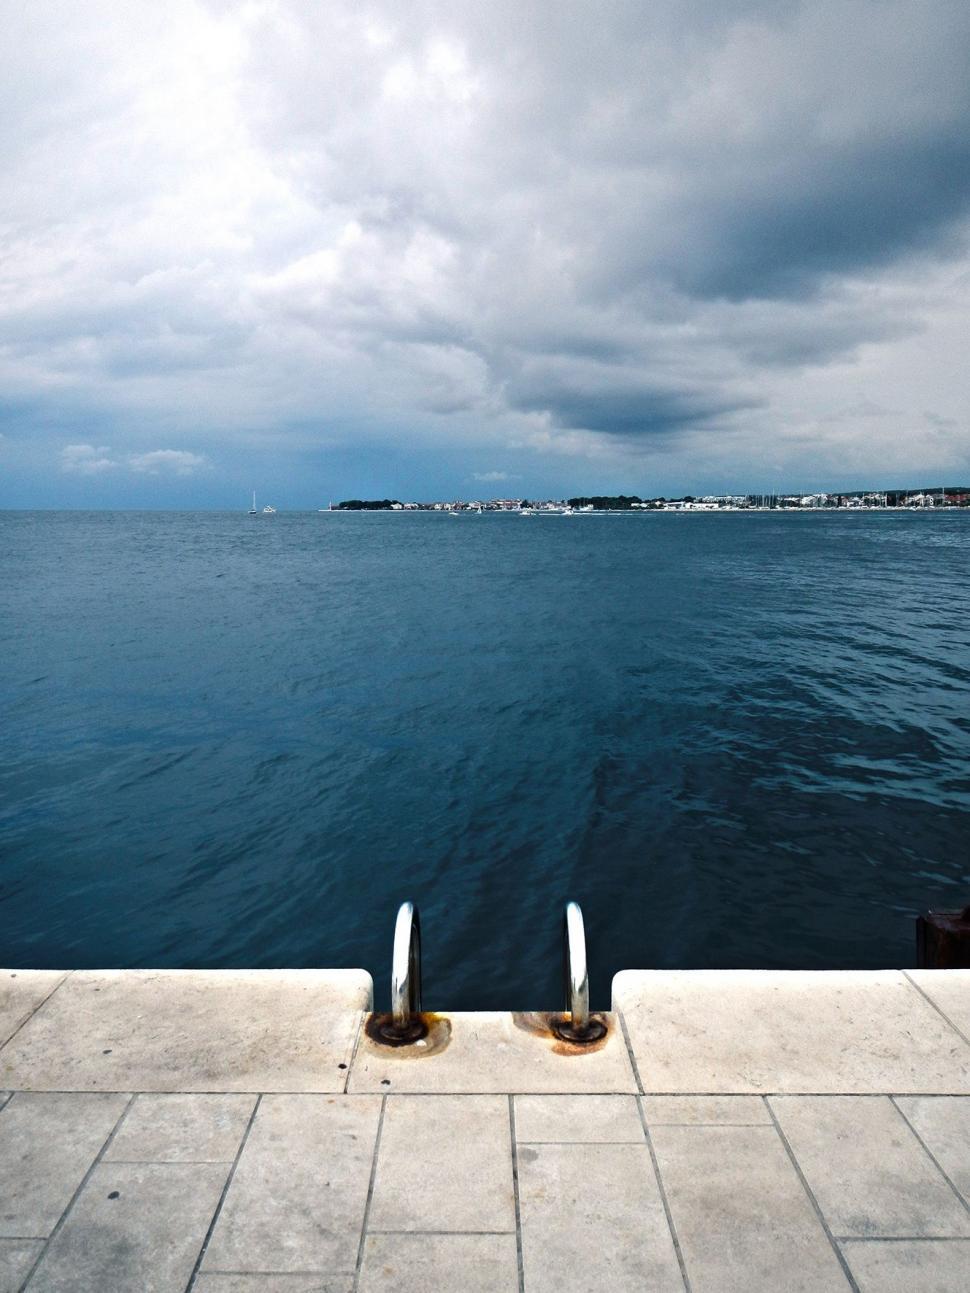 Free Image of A View of a Body of Water From a Pier 